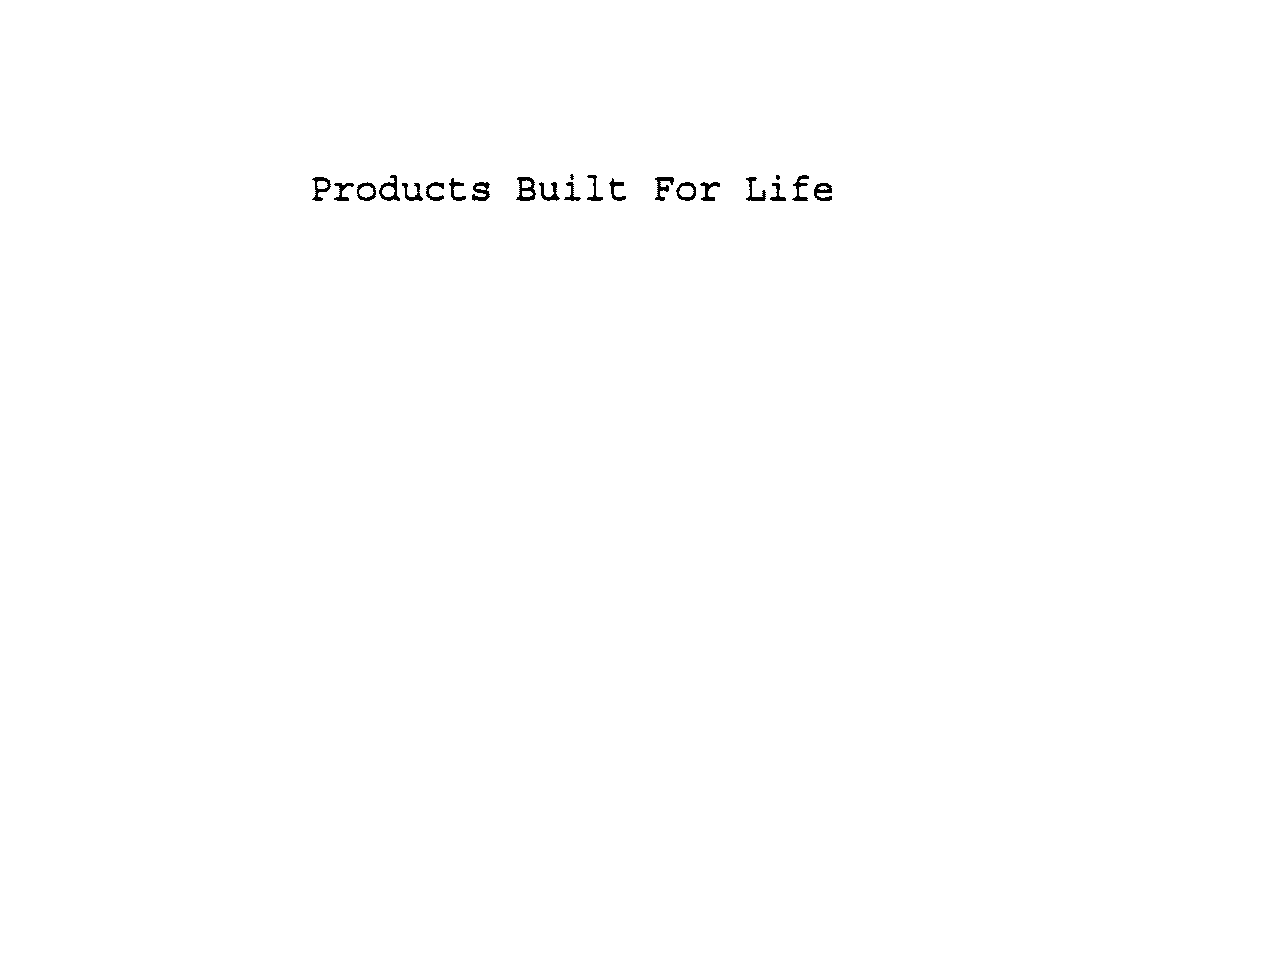  PRODUCTS BUILT FOR LIFE